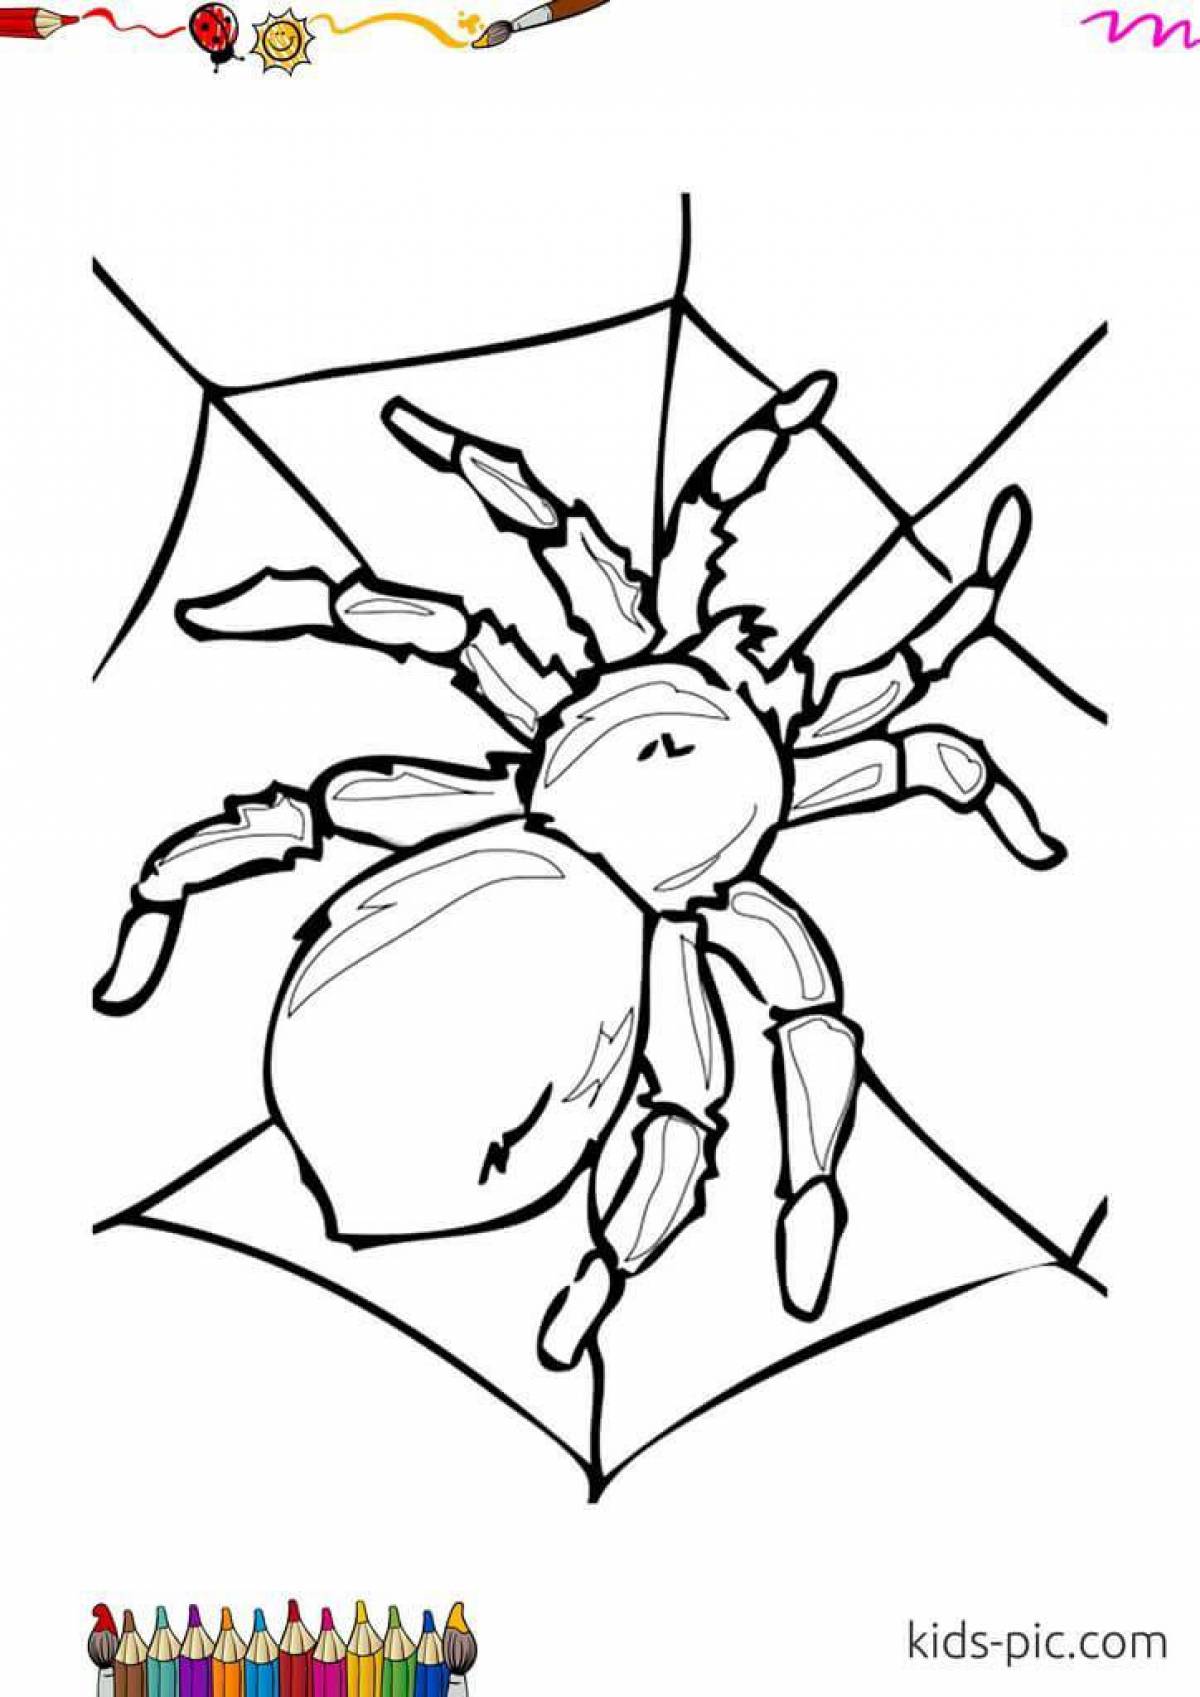 Fabulous spider coloring page for kids